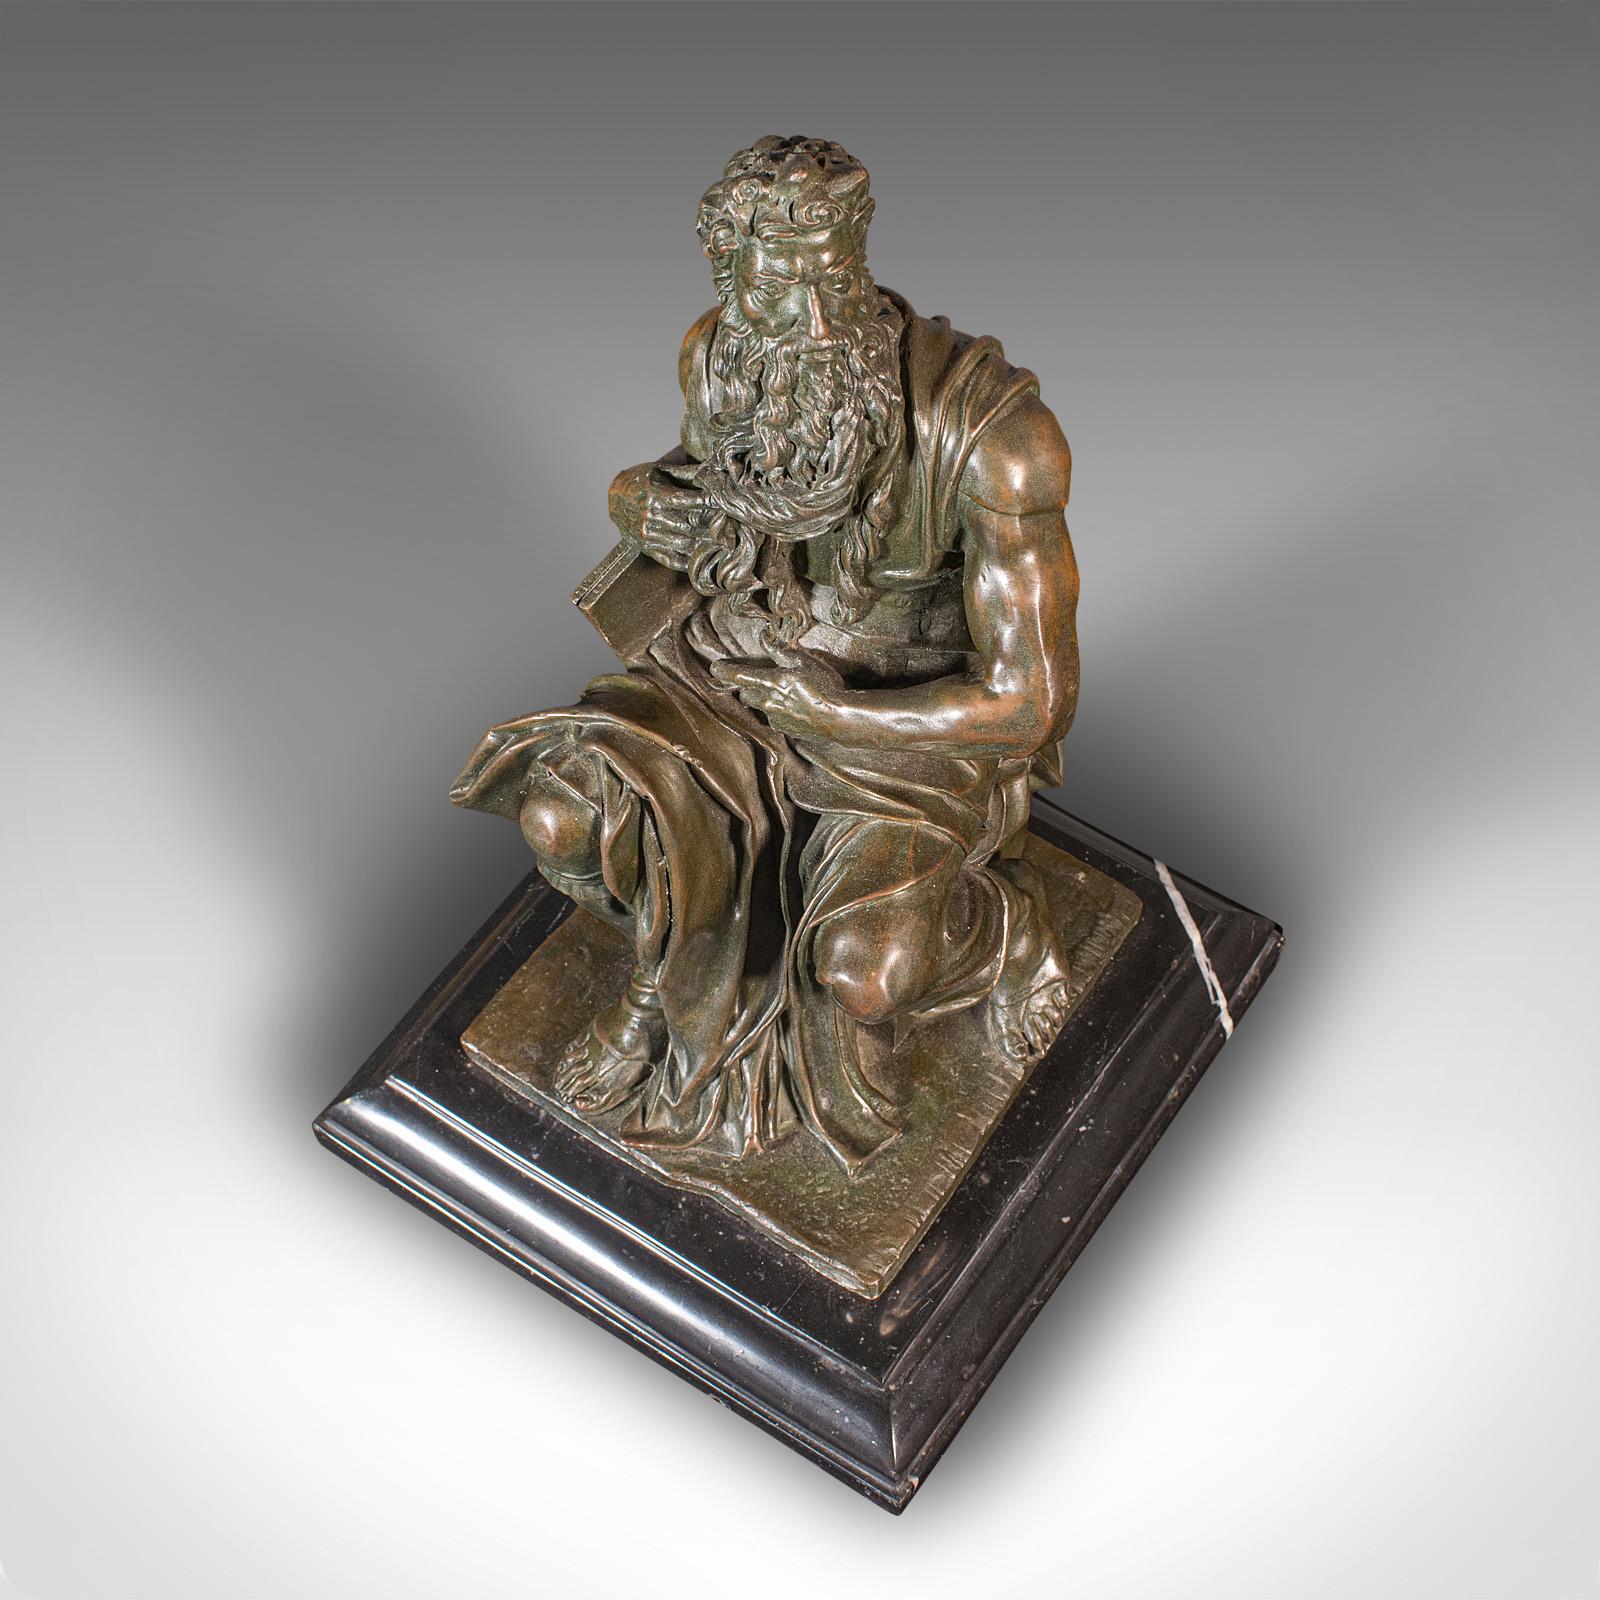 British Vintage Decorative Figure of Moses, English, Bronze, Statue, After Michelangelo For Sale